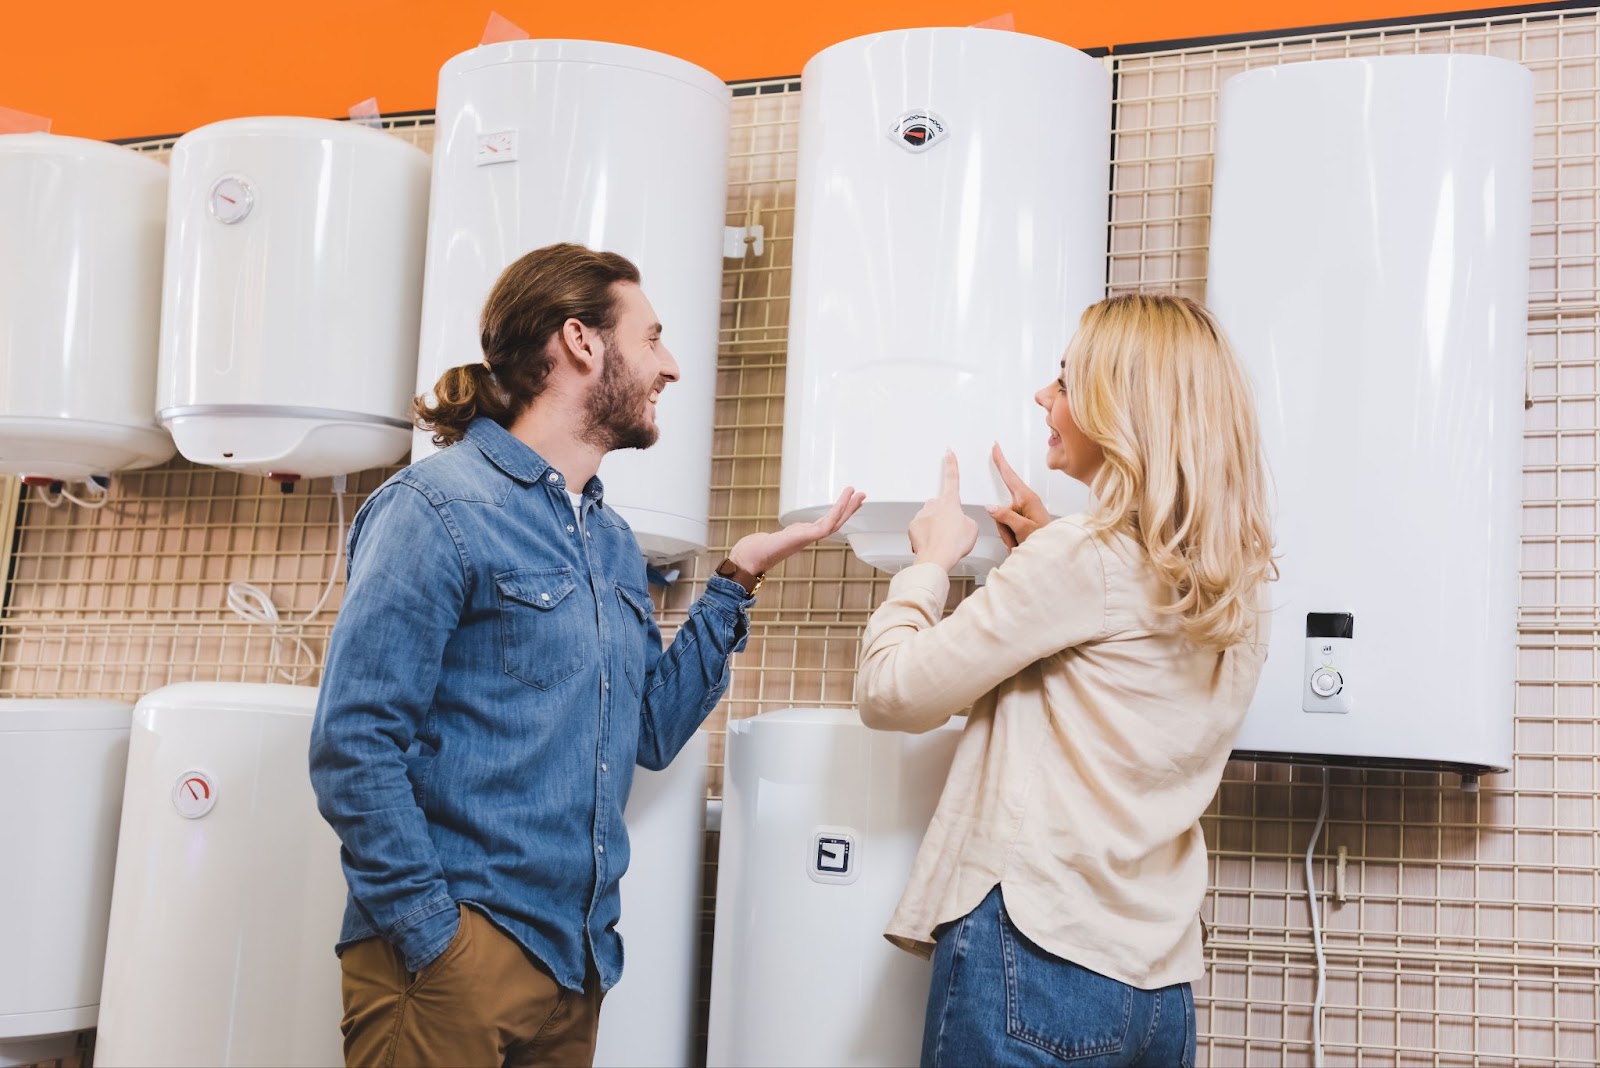 A couple in a store smiling at each other while gesturing towards tankless water heaters on display.